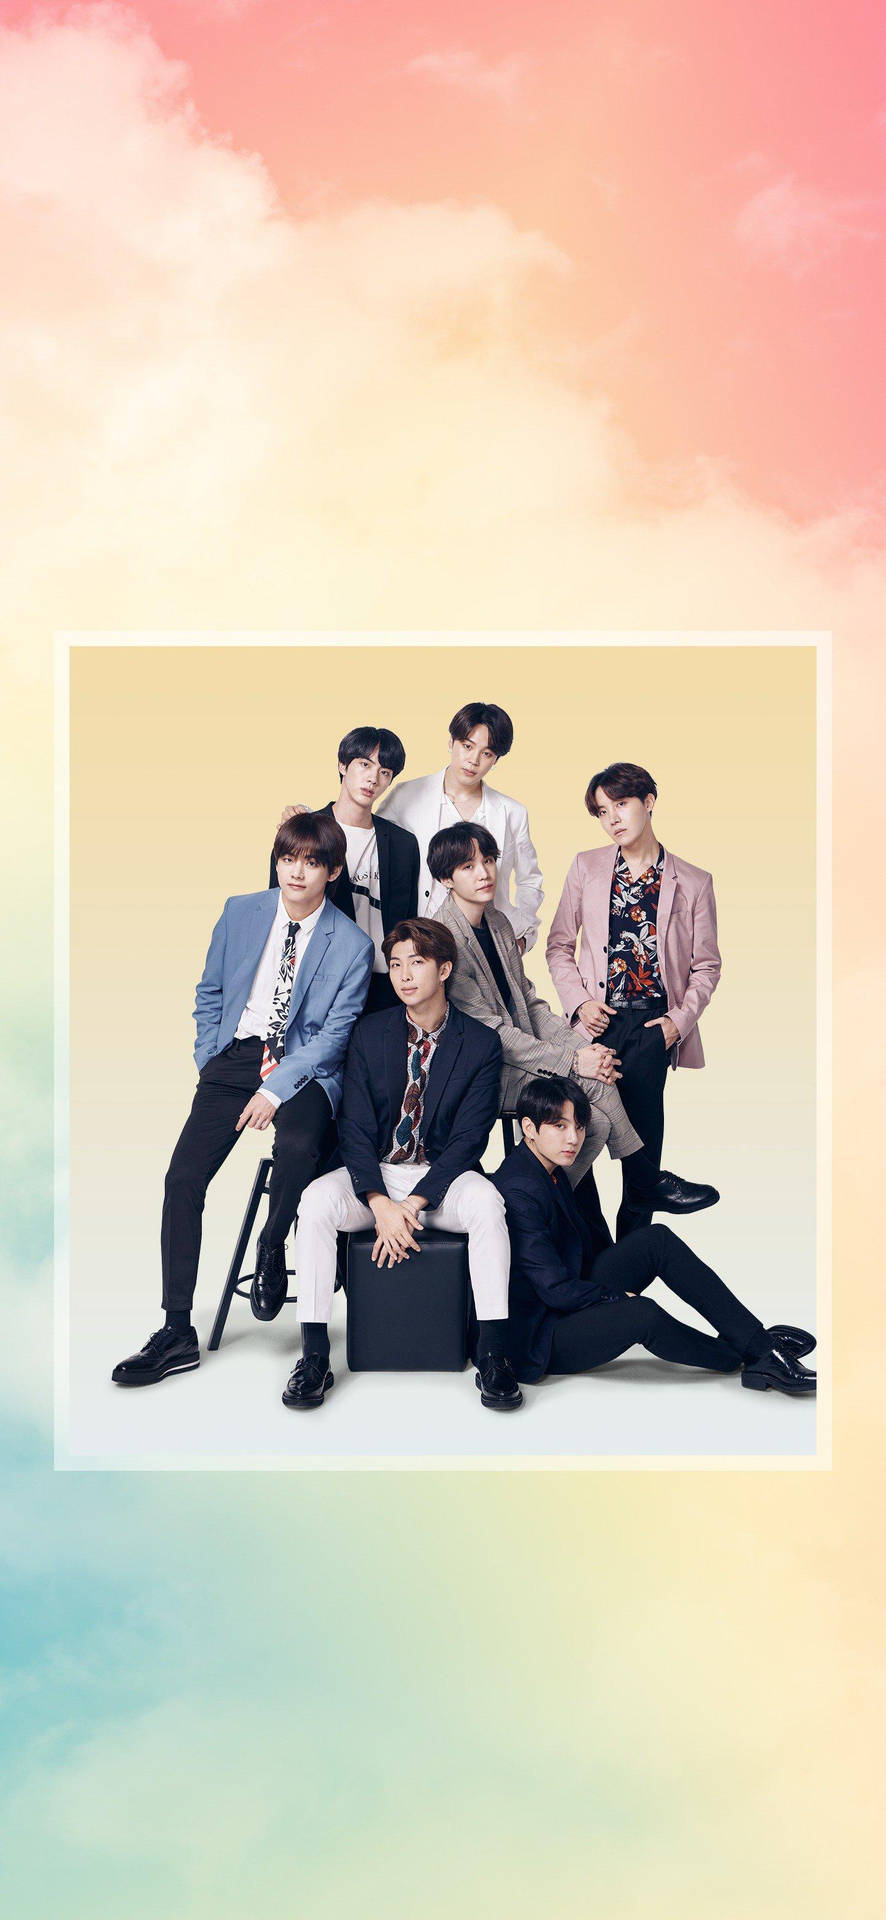 Colorful Bts Dynamite Group Photo Wallpaper